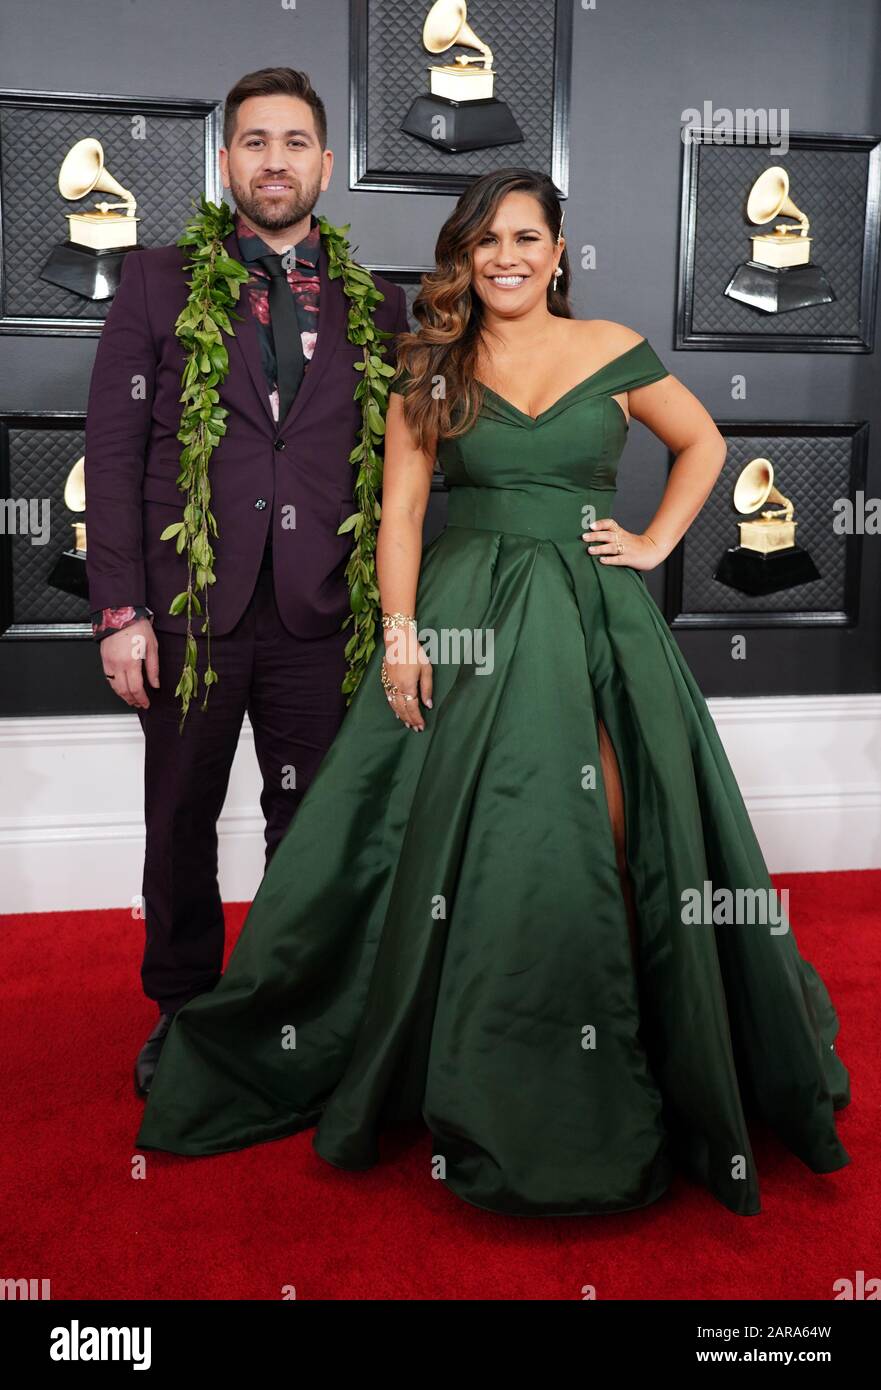 Los Angeles, Ca. 26th Jan, 2020. Imua Garza and Kimie Miner at the 62nd Grammy Awards at the Staples Center in Los Angeles, California on January 26, 2020. Credit: Tony Forte/Media Punch/Alamy Live News Stock Photo